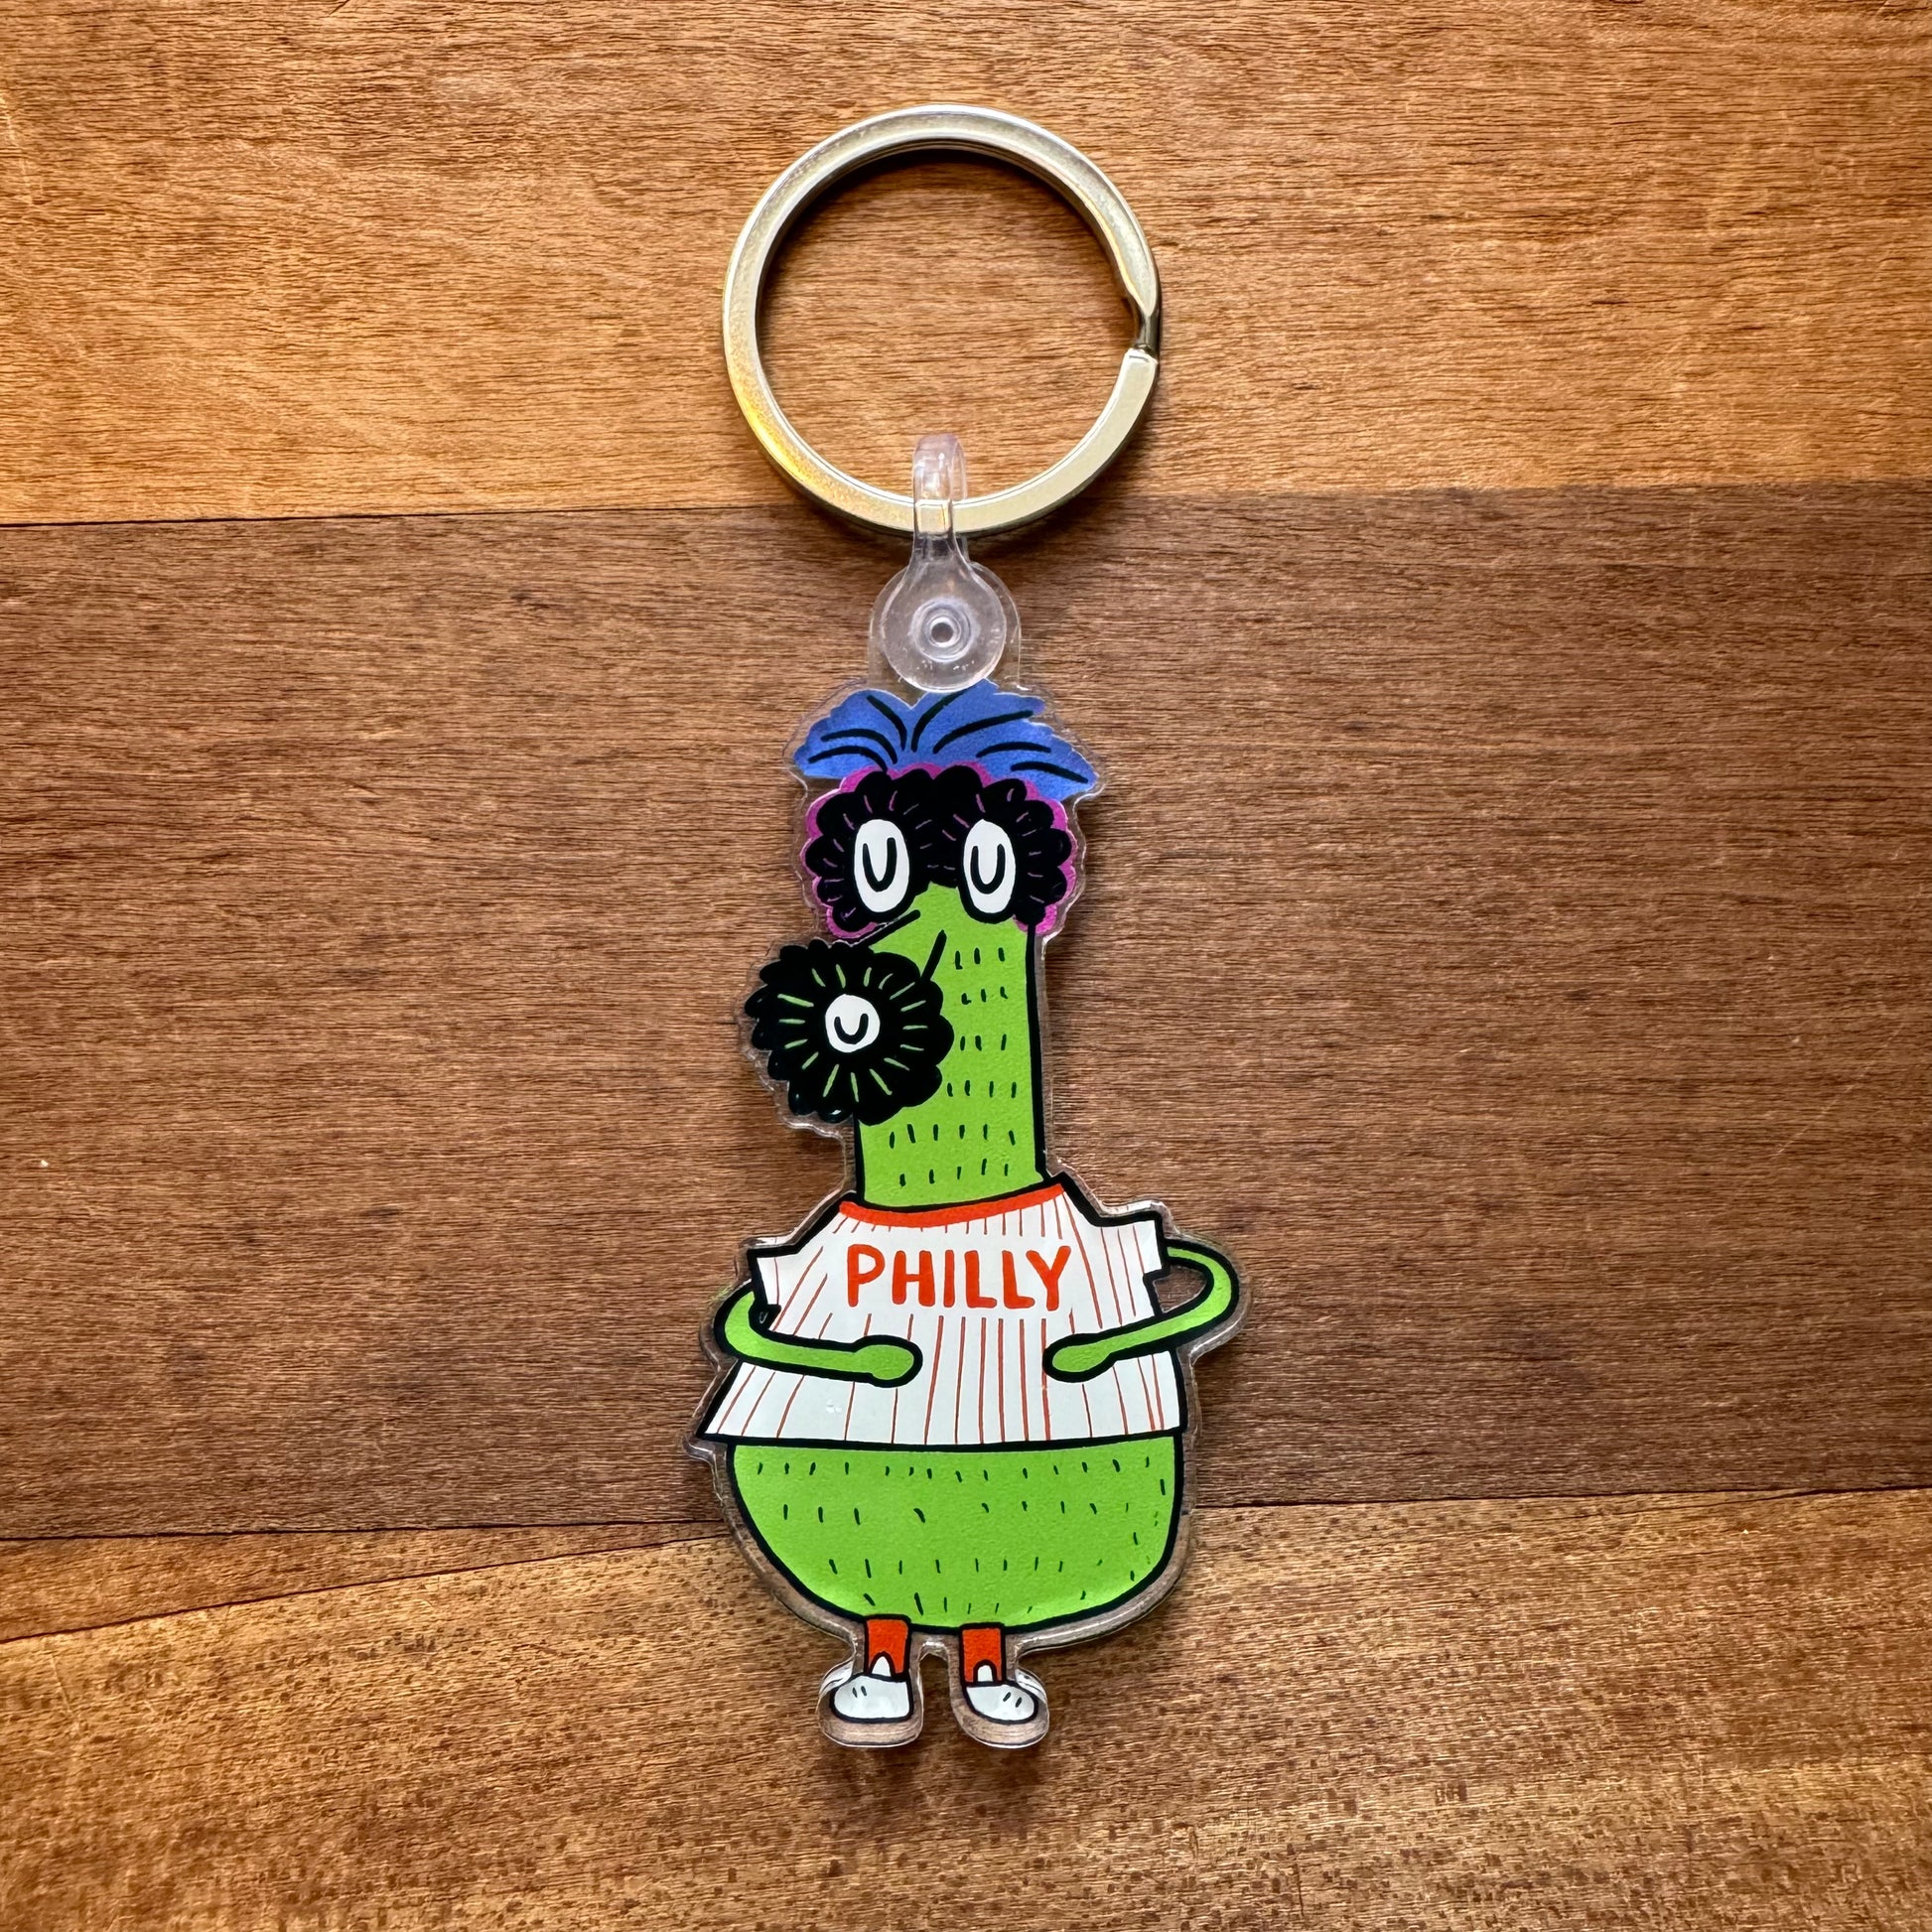 A keychain from Ana Thorne's Gritty & Phanatic collection, showcasing a green cartoon character holding a sign with "PHILLY," stands on a wooden surface.